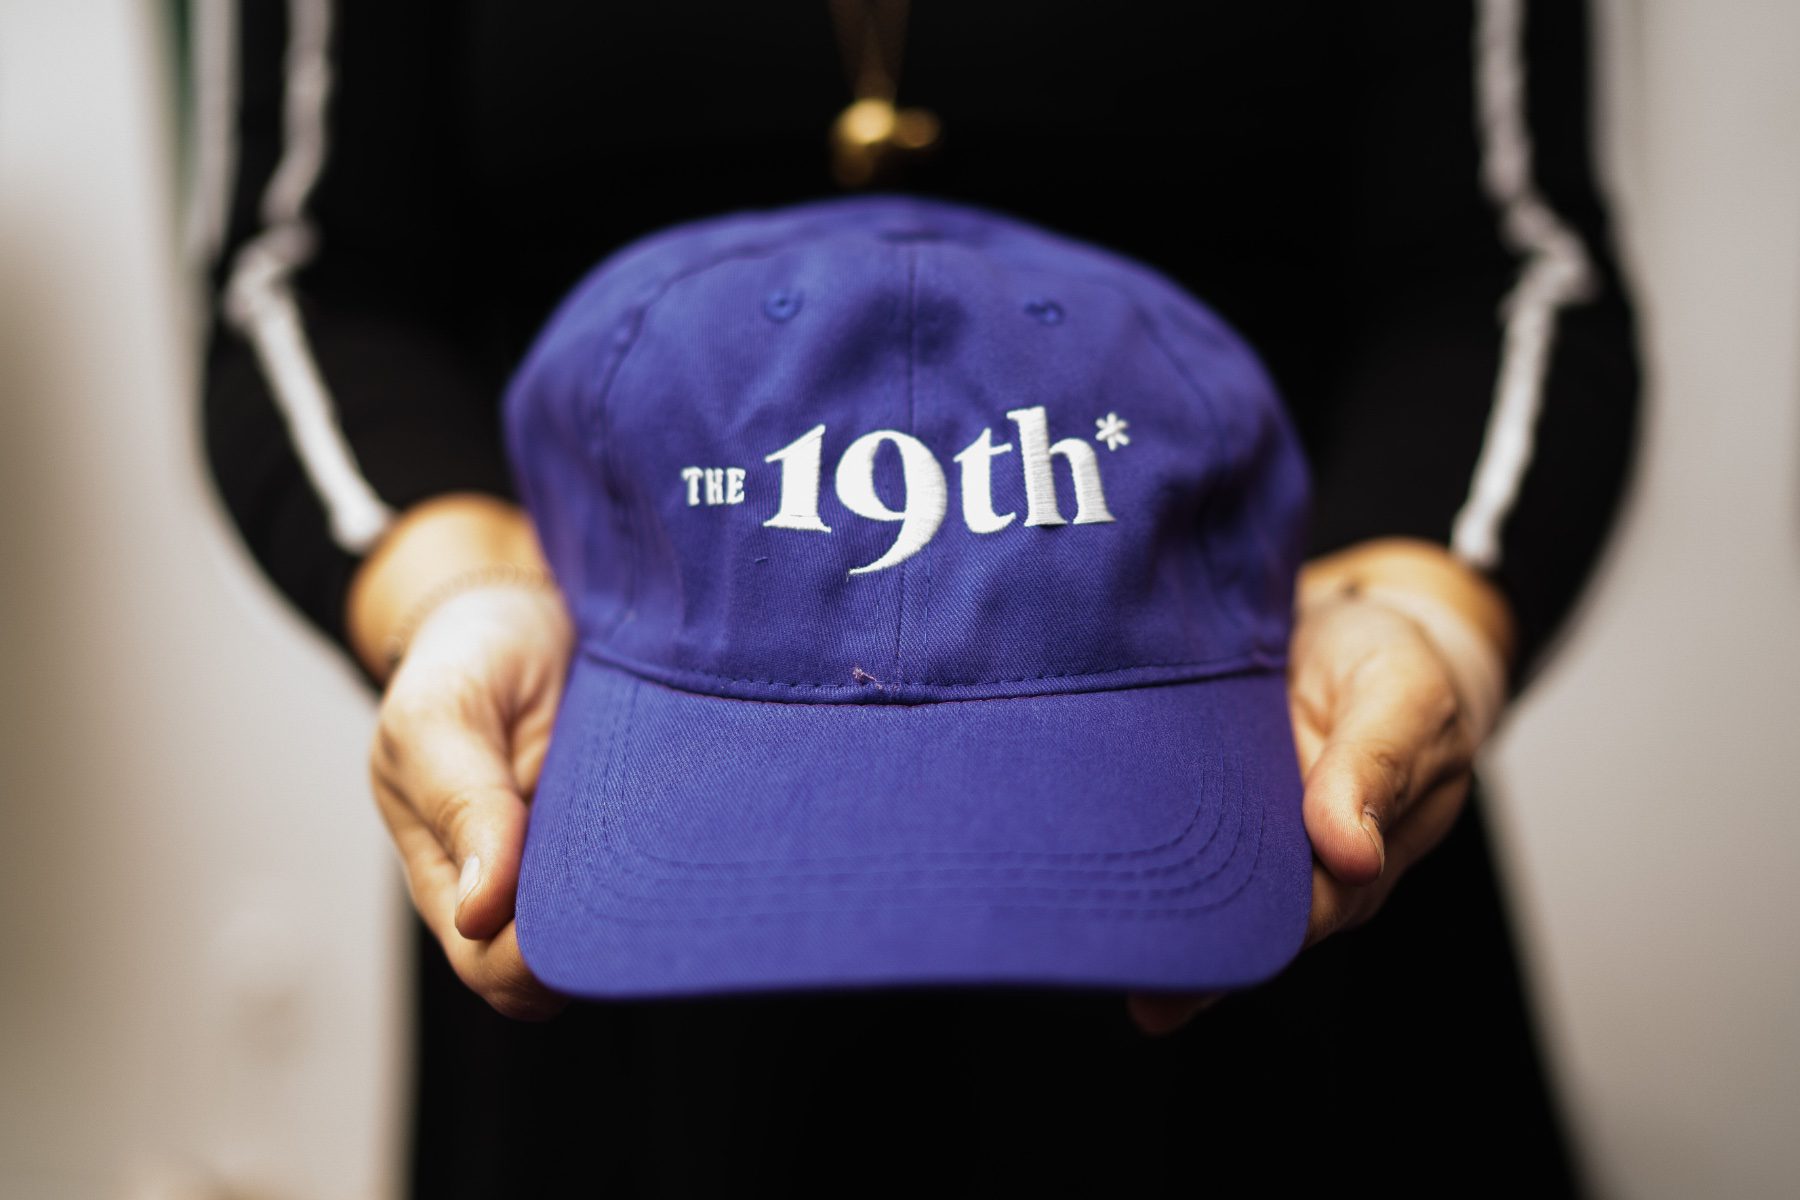 Purple baseball cap with "The 19th" stitched on it.